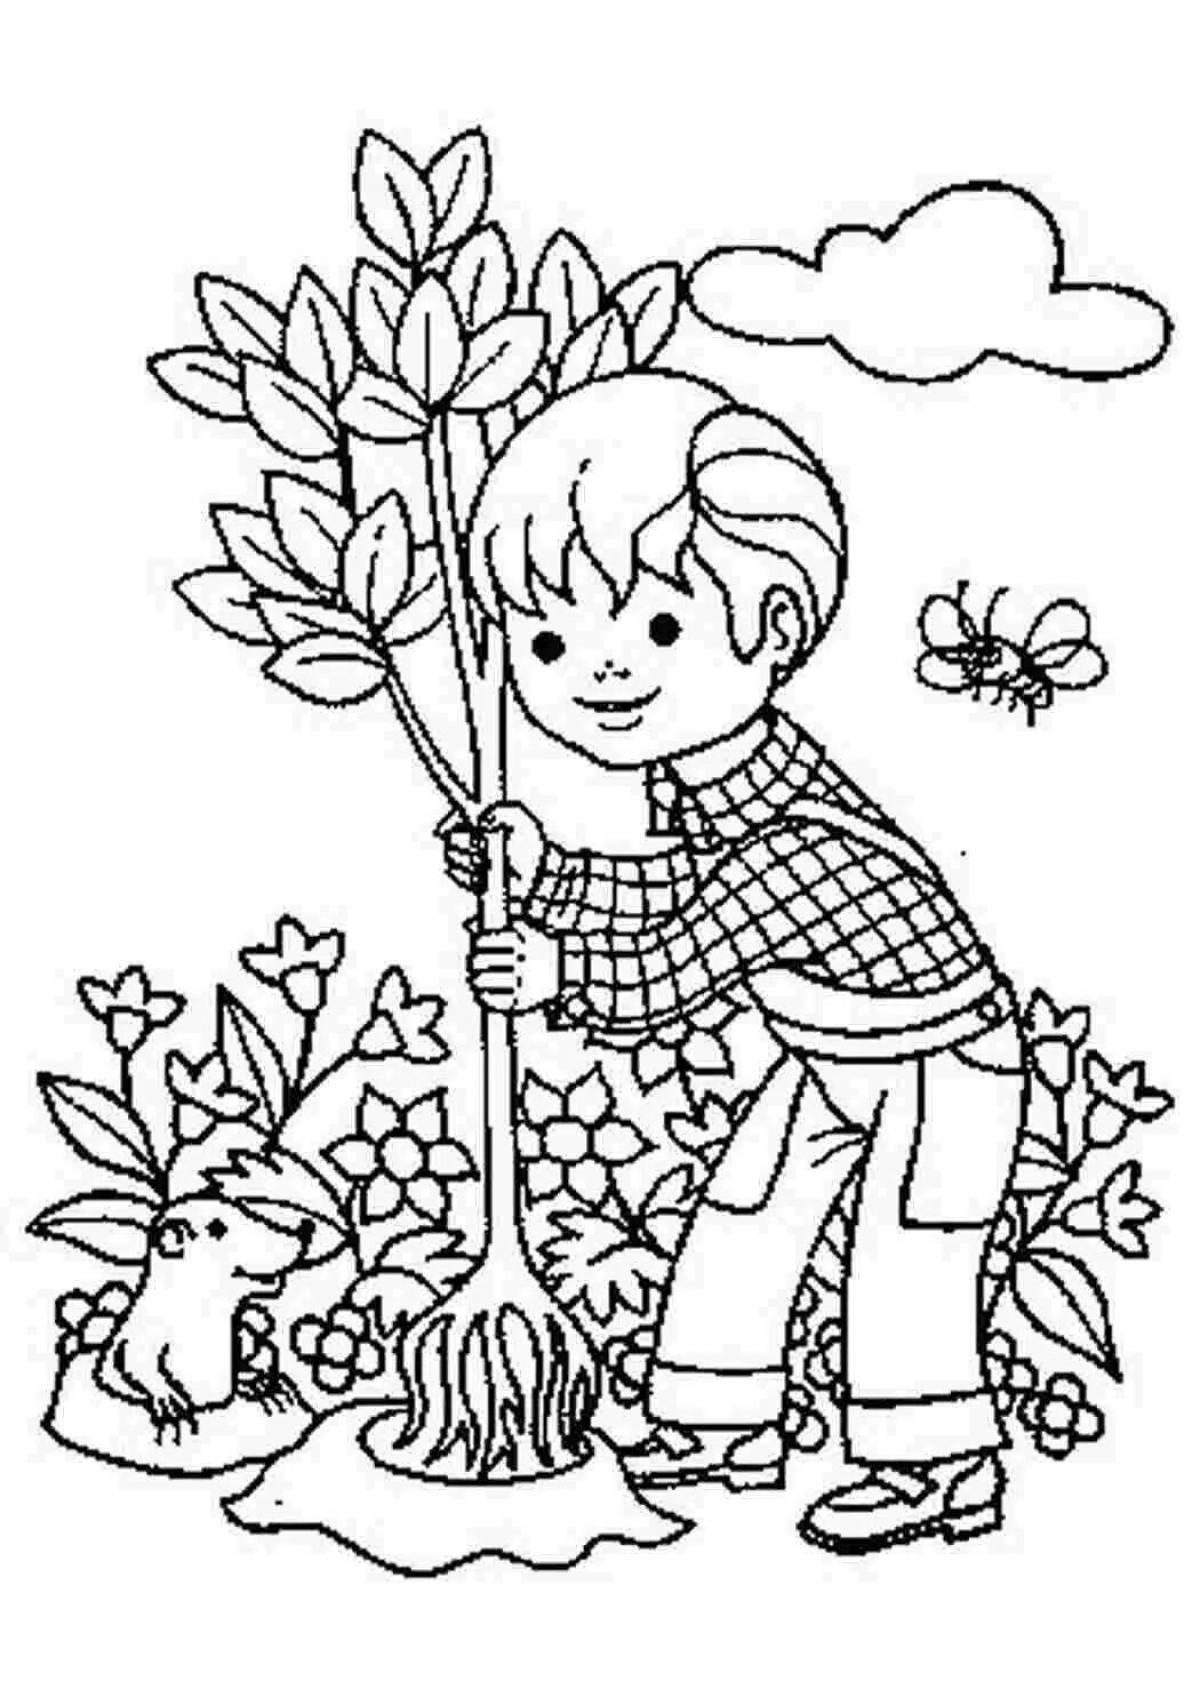 Awesome caring for nature coloring page